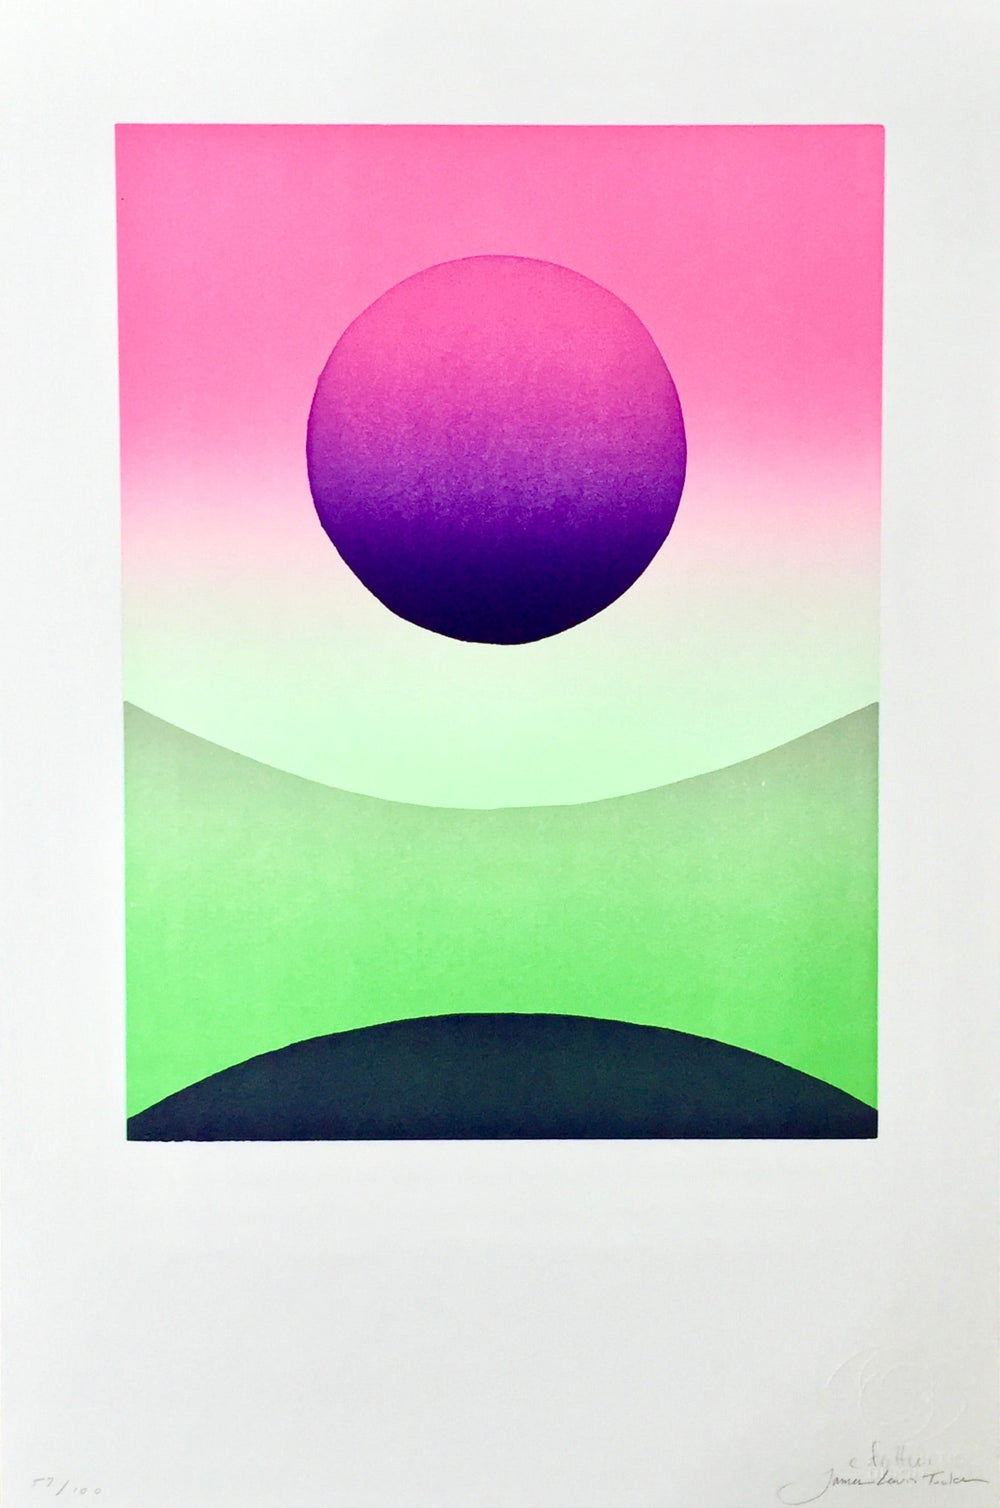 A purple and green circle print by Aesthetic Union press.